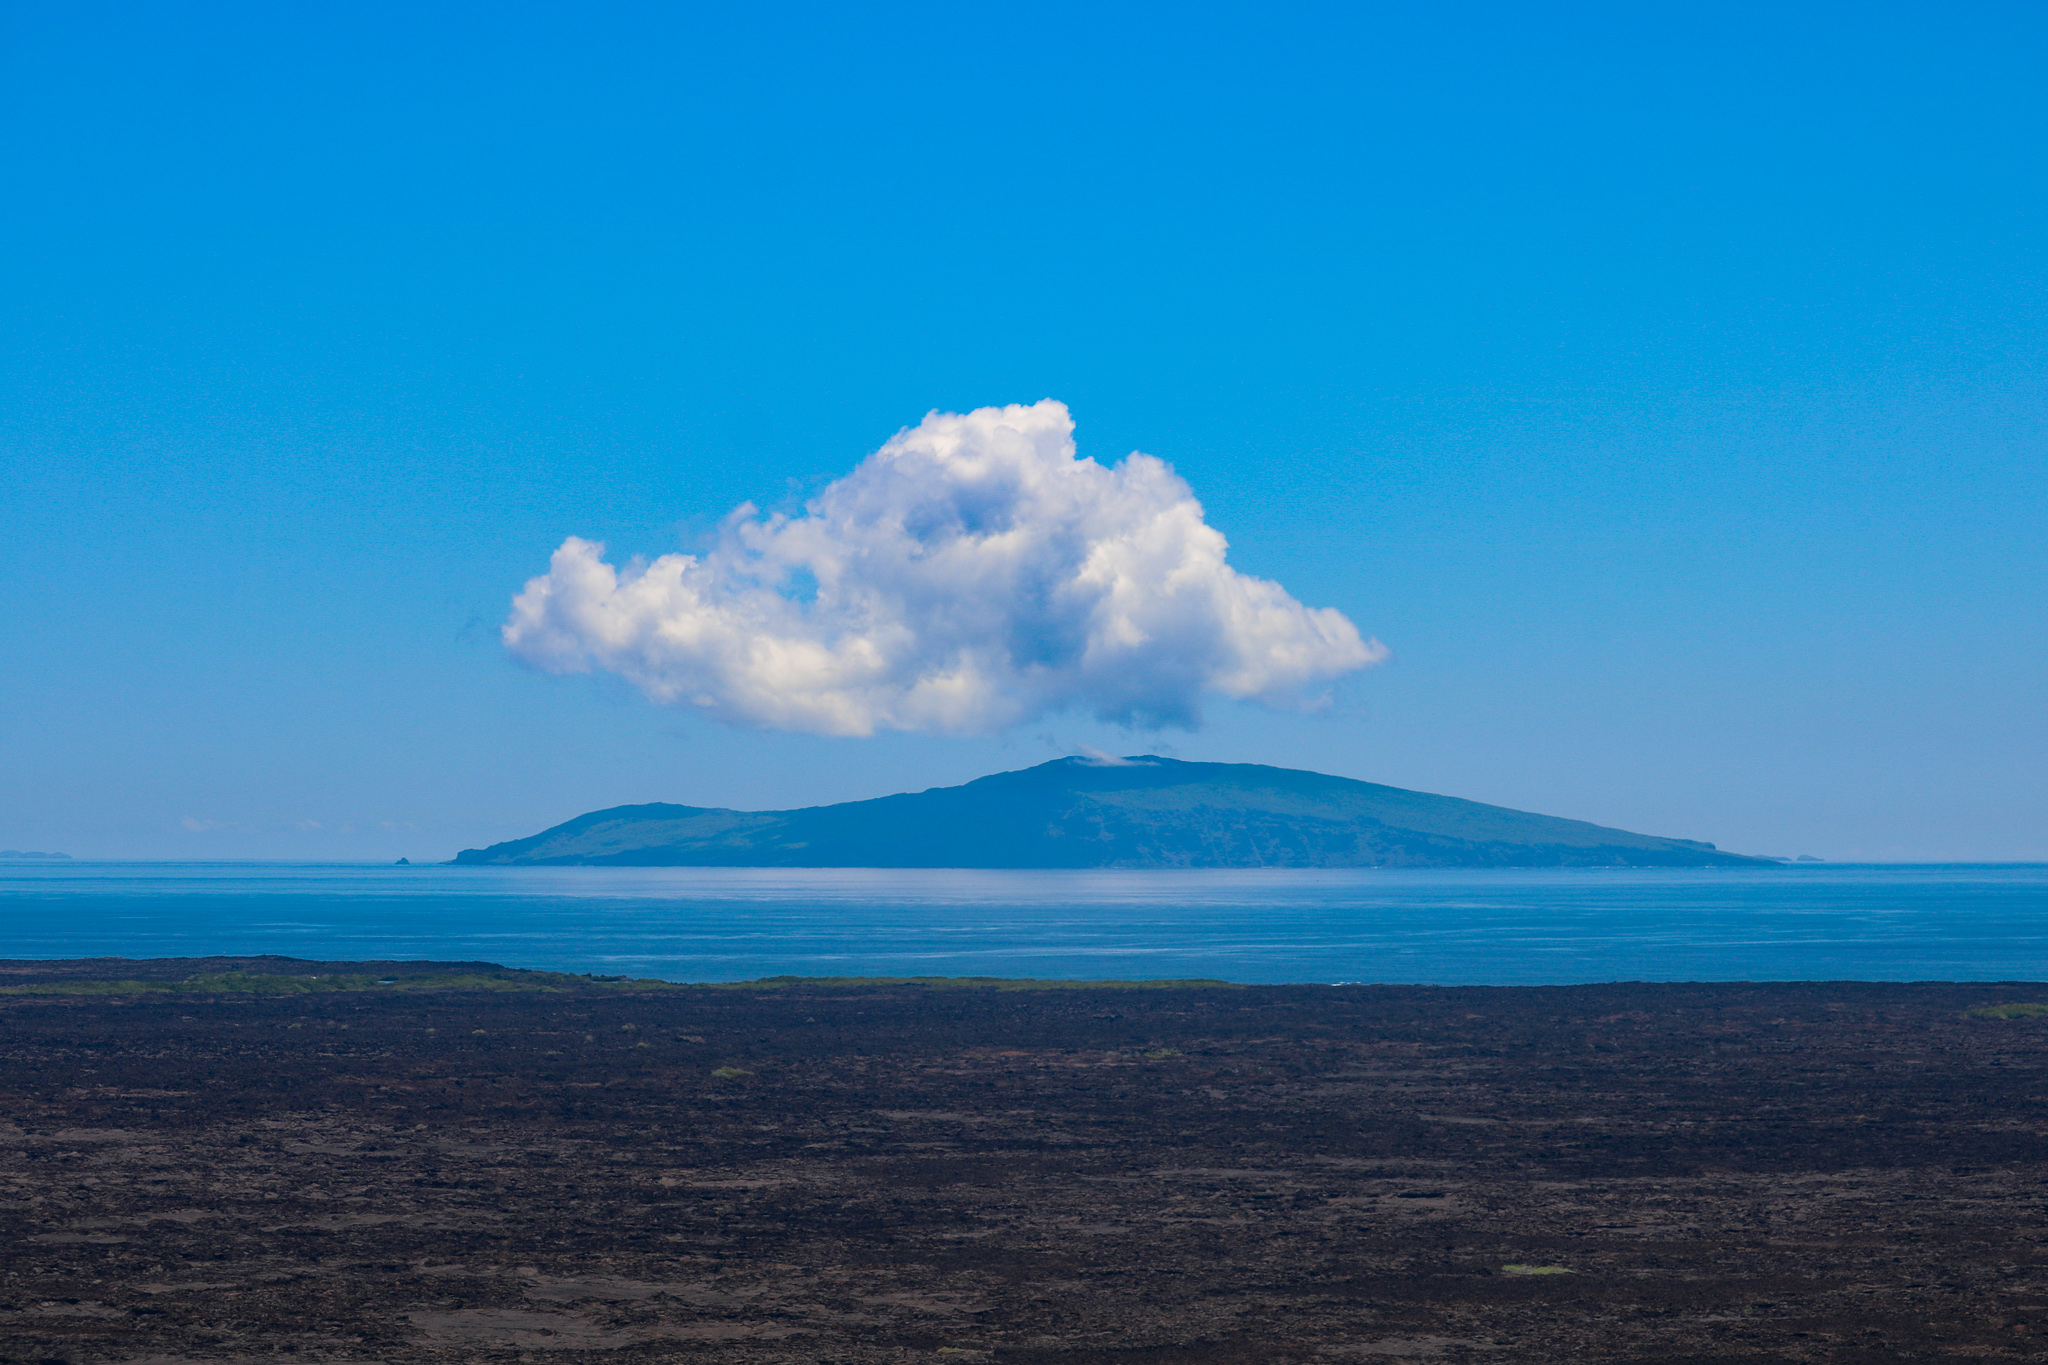 Galapagos Conservation Trust Photography Competition landscape Isabela Island Sierra Negra Volcano